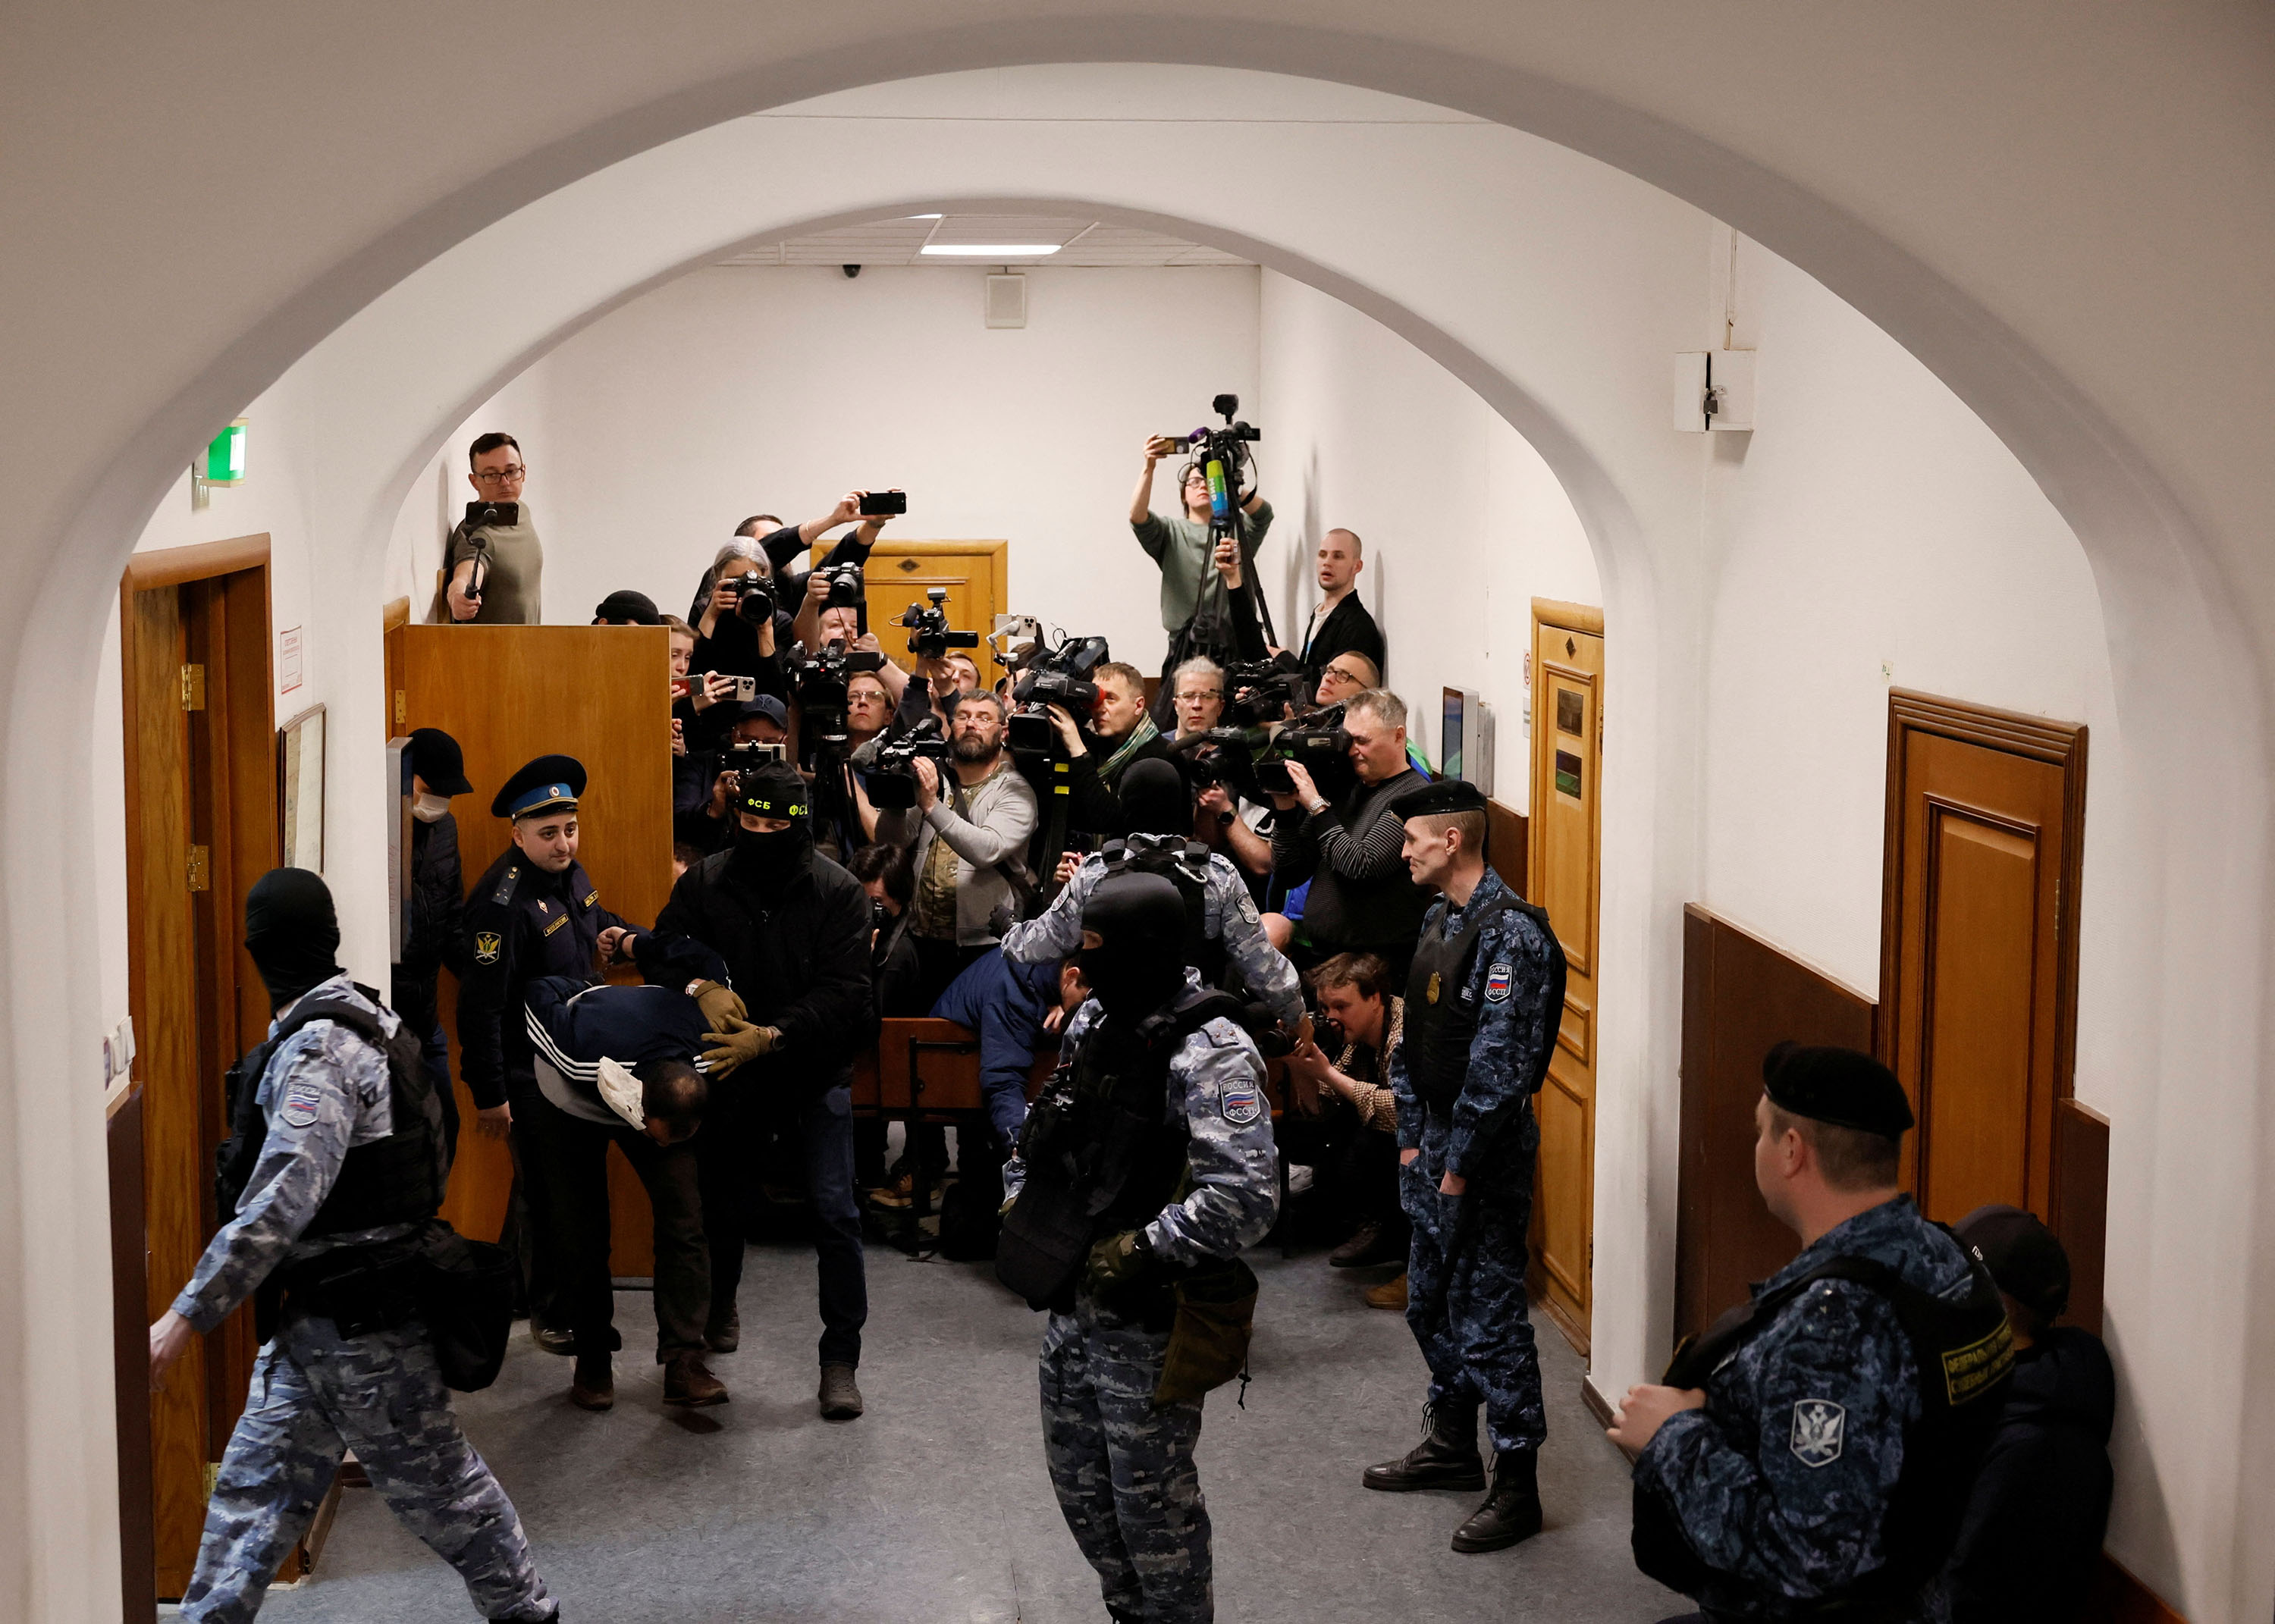 Saidakrami Murodali Rachabalizoda, a suspect in the shooting attack at the Crocus City Hall concert venue, is escorted following a court hearing at the Basmanny district court in Moscow, Russia, on March 24. 